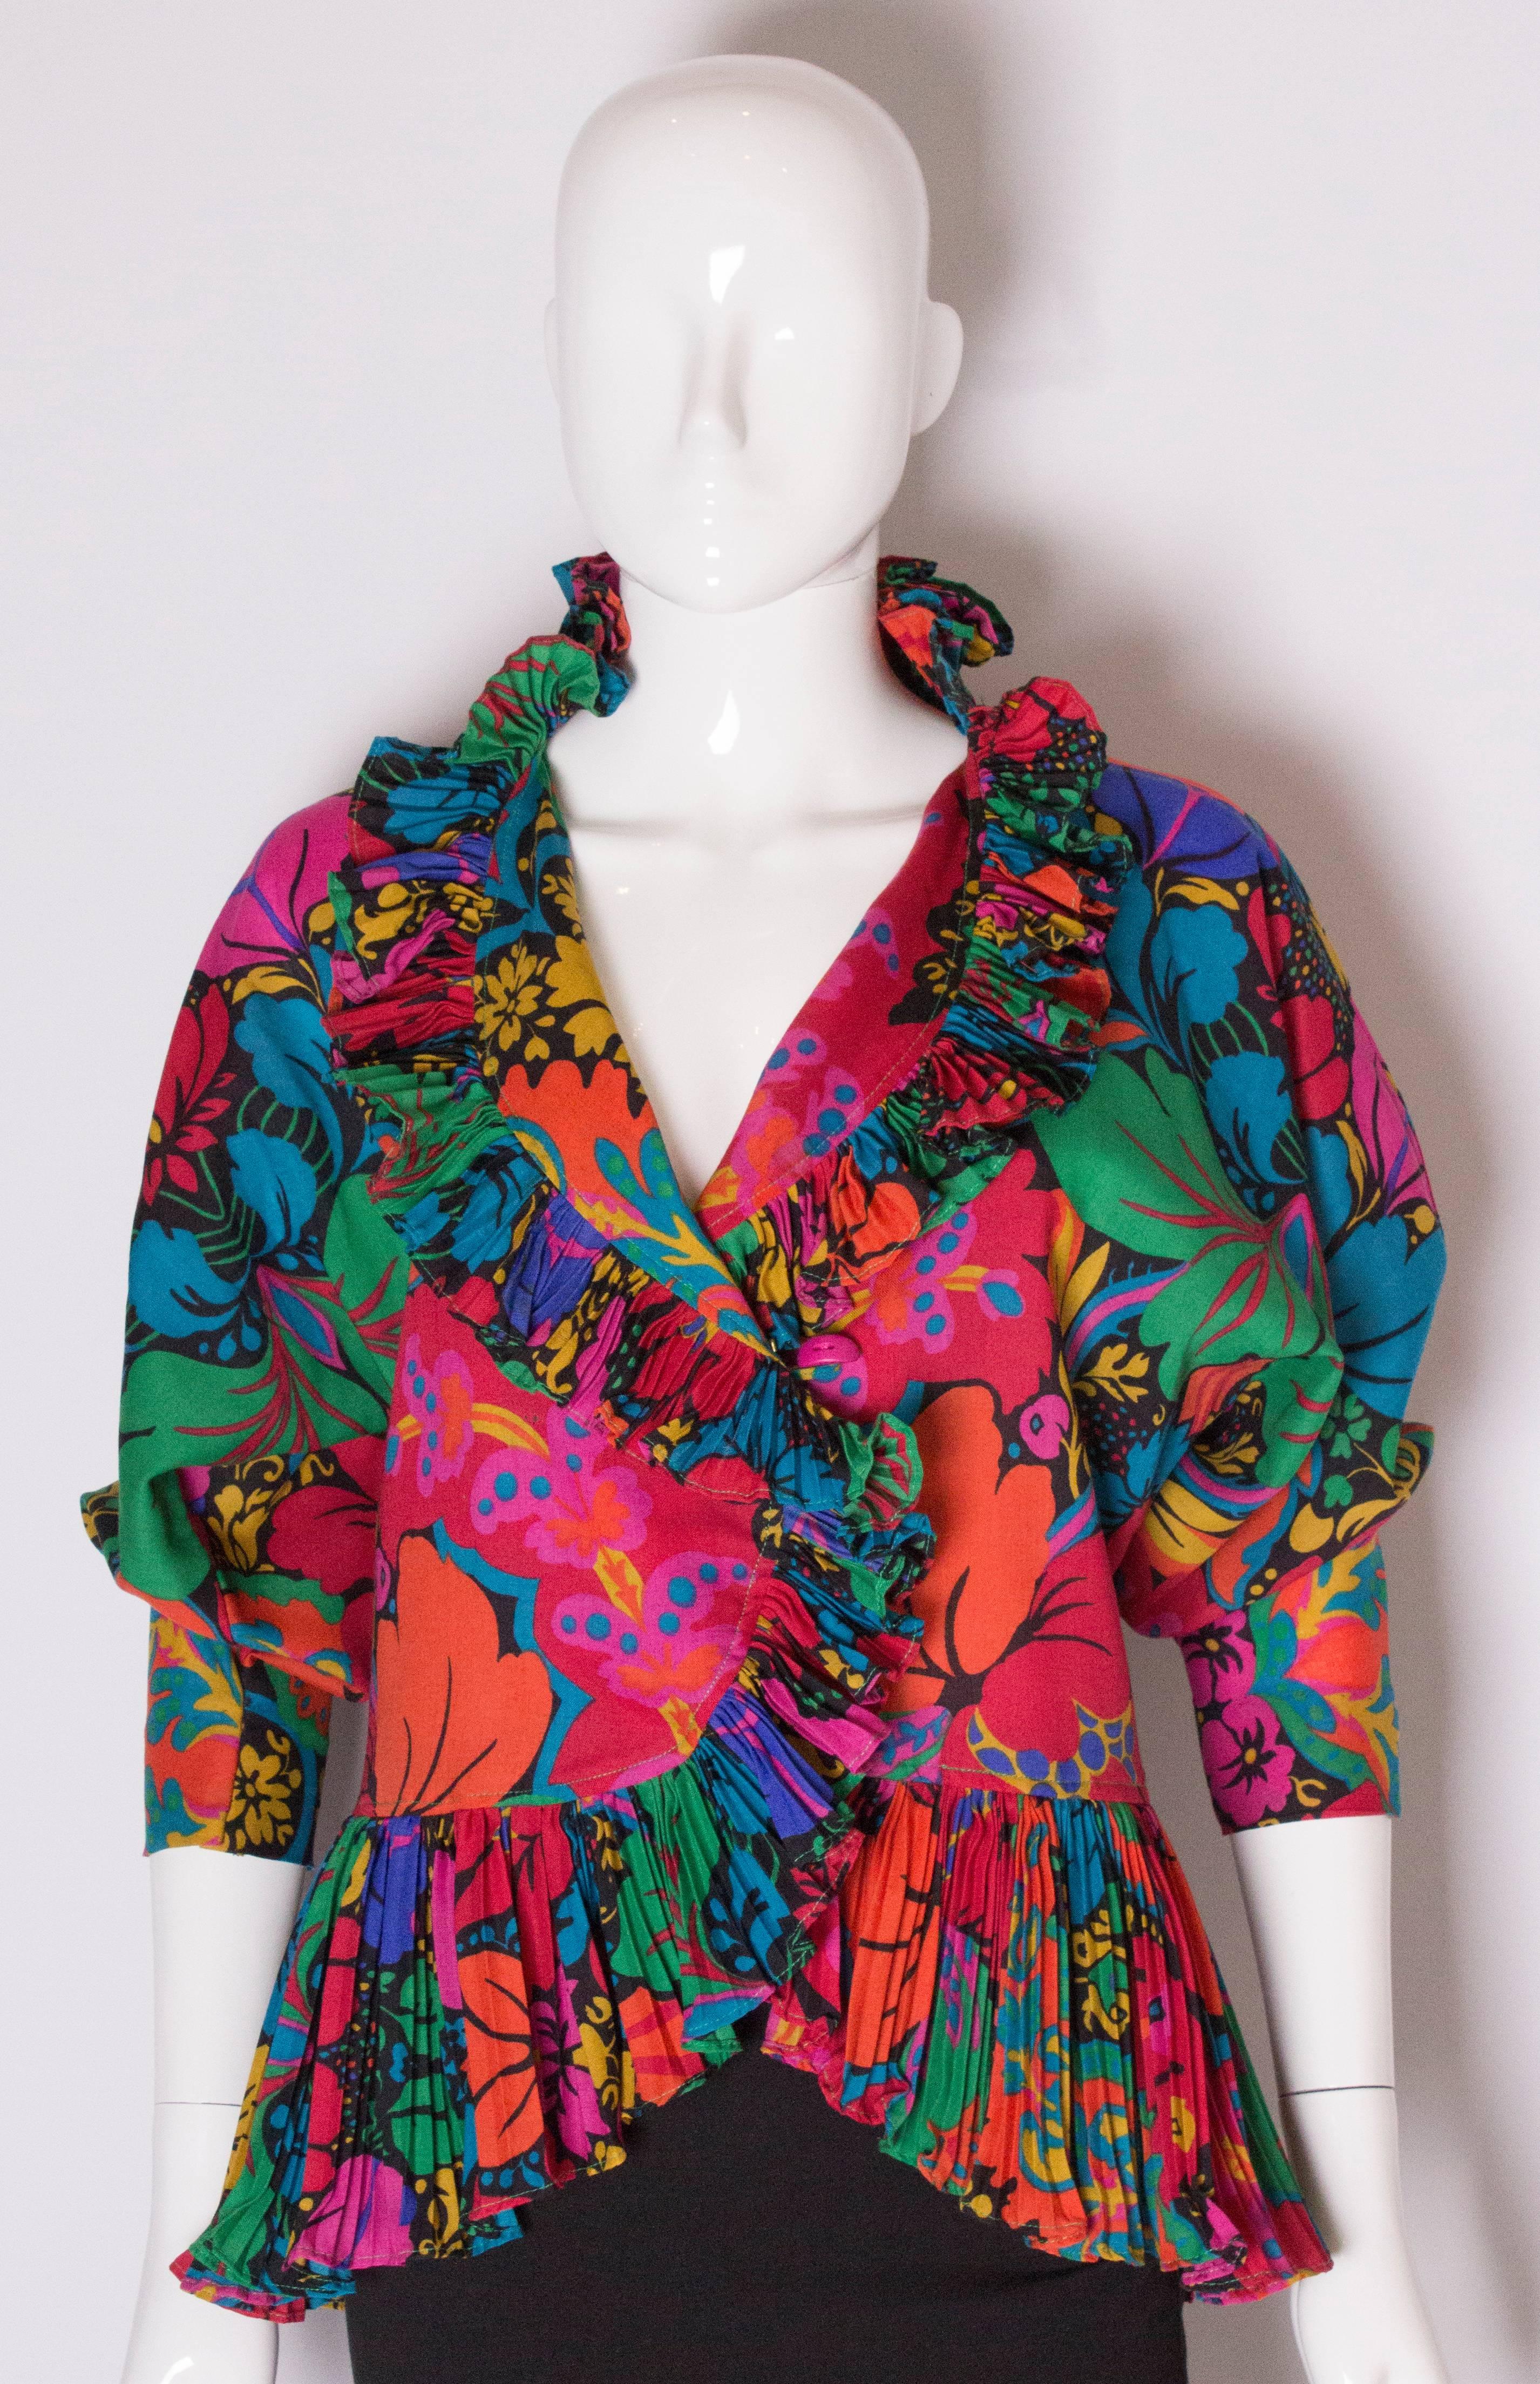 A great jacket/top by Jean Muir. In a vibrant wool print, the jacket has frill at the hem and collar, and a wrap over front with two buttons.